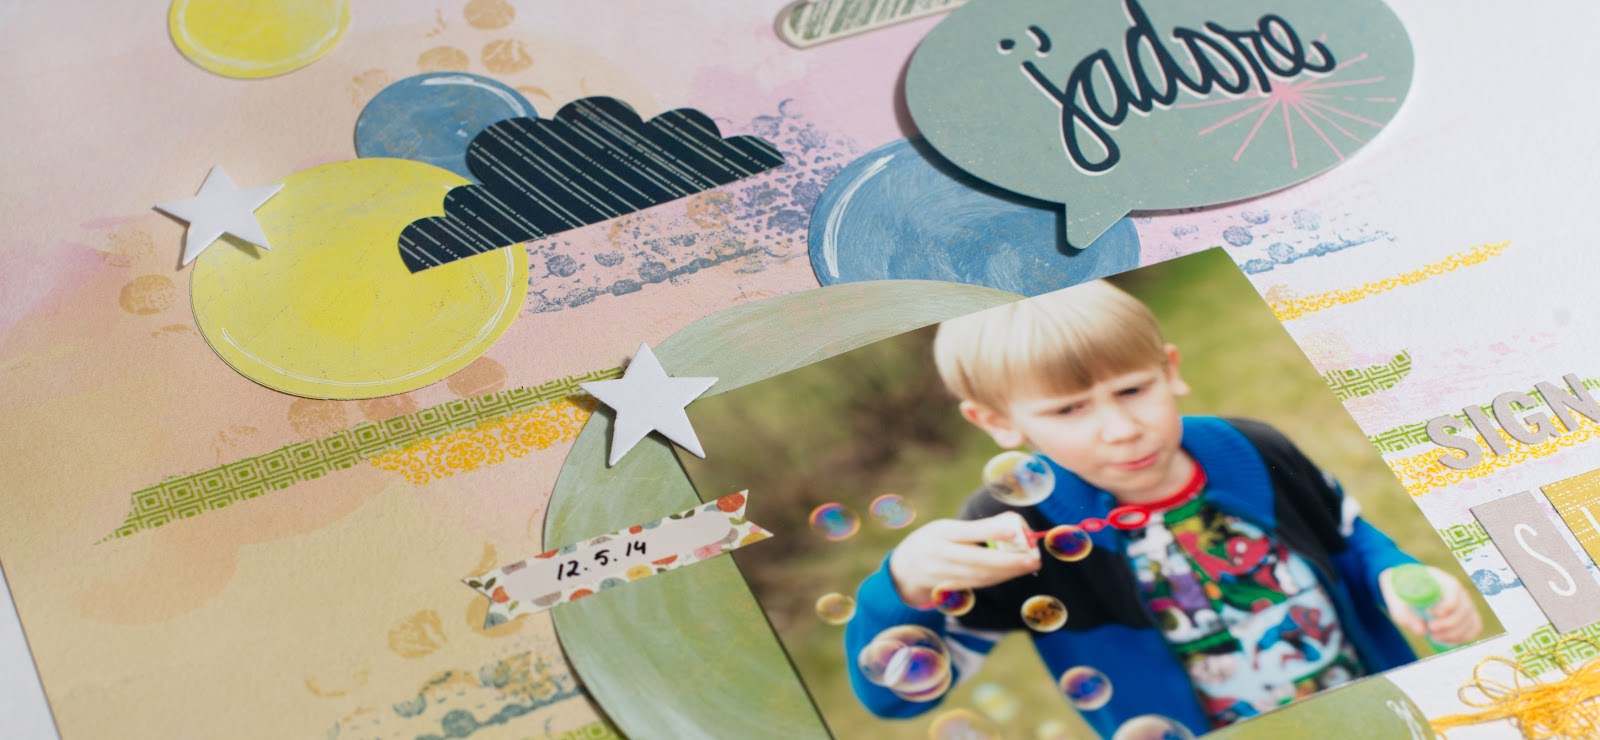 Scrapbooking Layout: Sign Of Summer